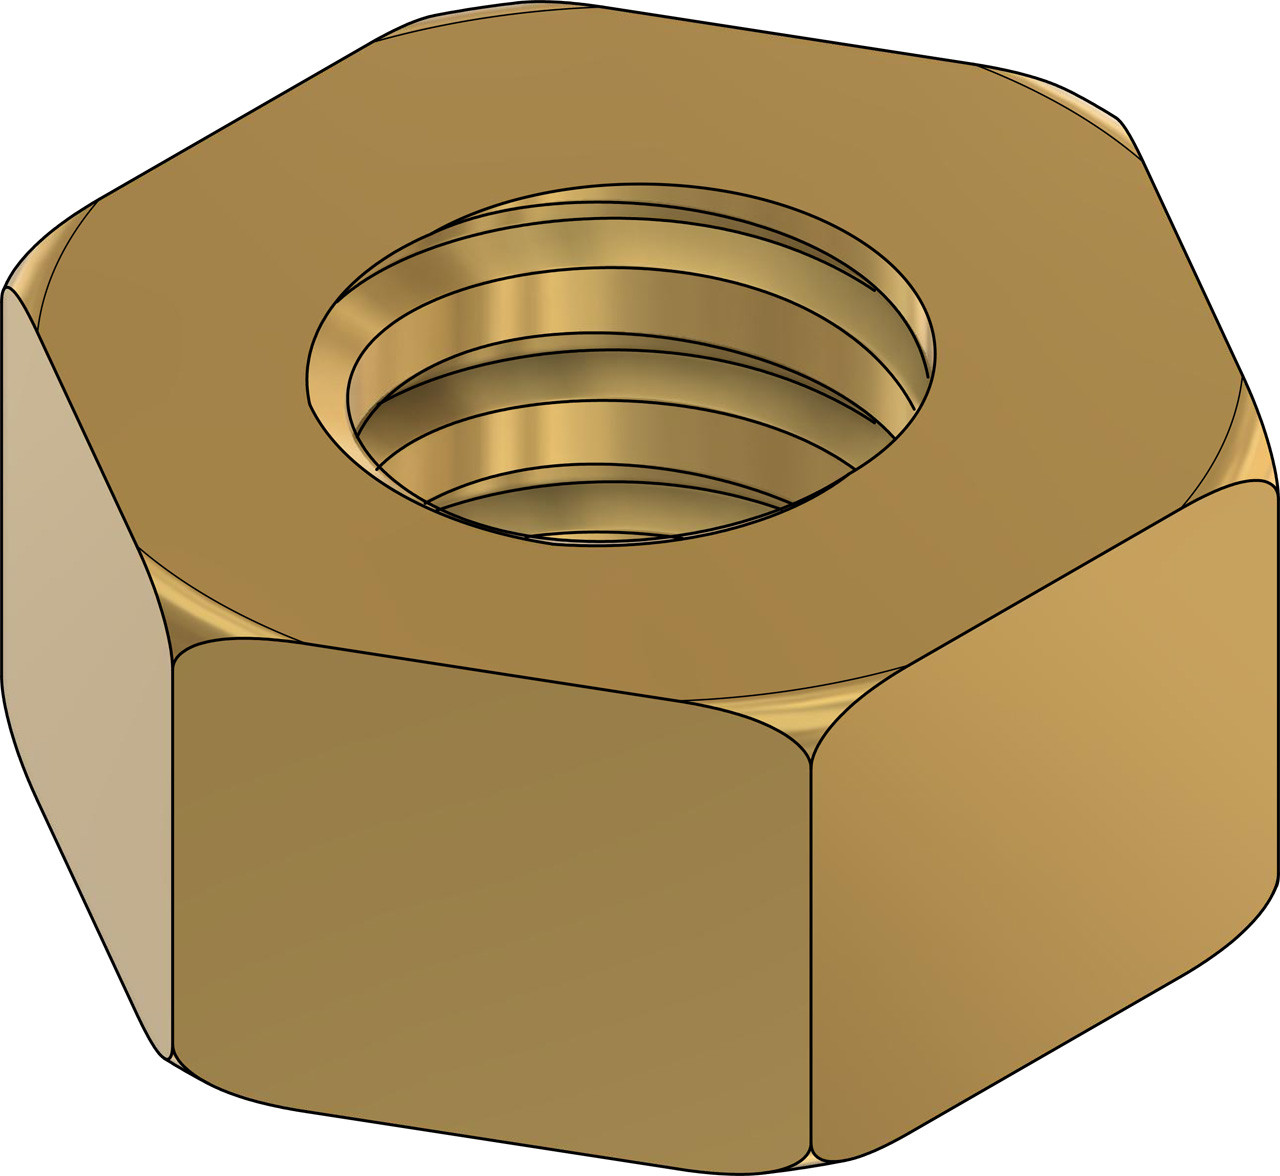 Machined Hex Nut
00-90 Thread
ACF 5/64" (across the flats) 2.00mm / .079"
Thickness .040" / 1.00mm
Material: Brass #360
Packaged in 100 Count Bag/Vials